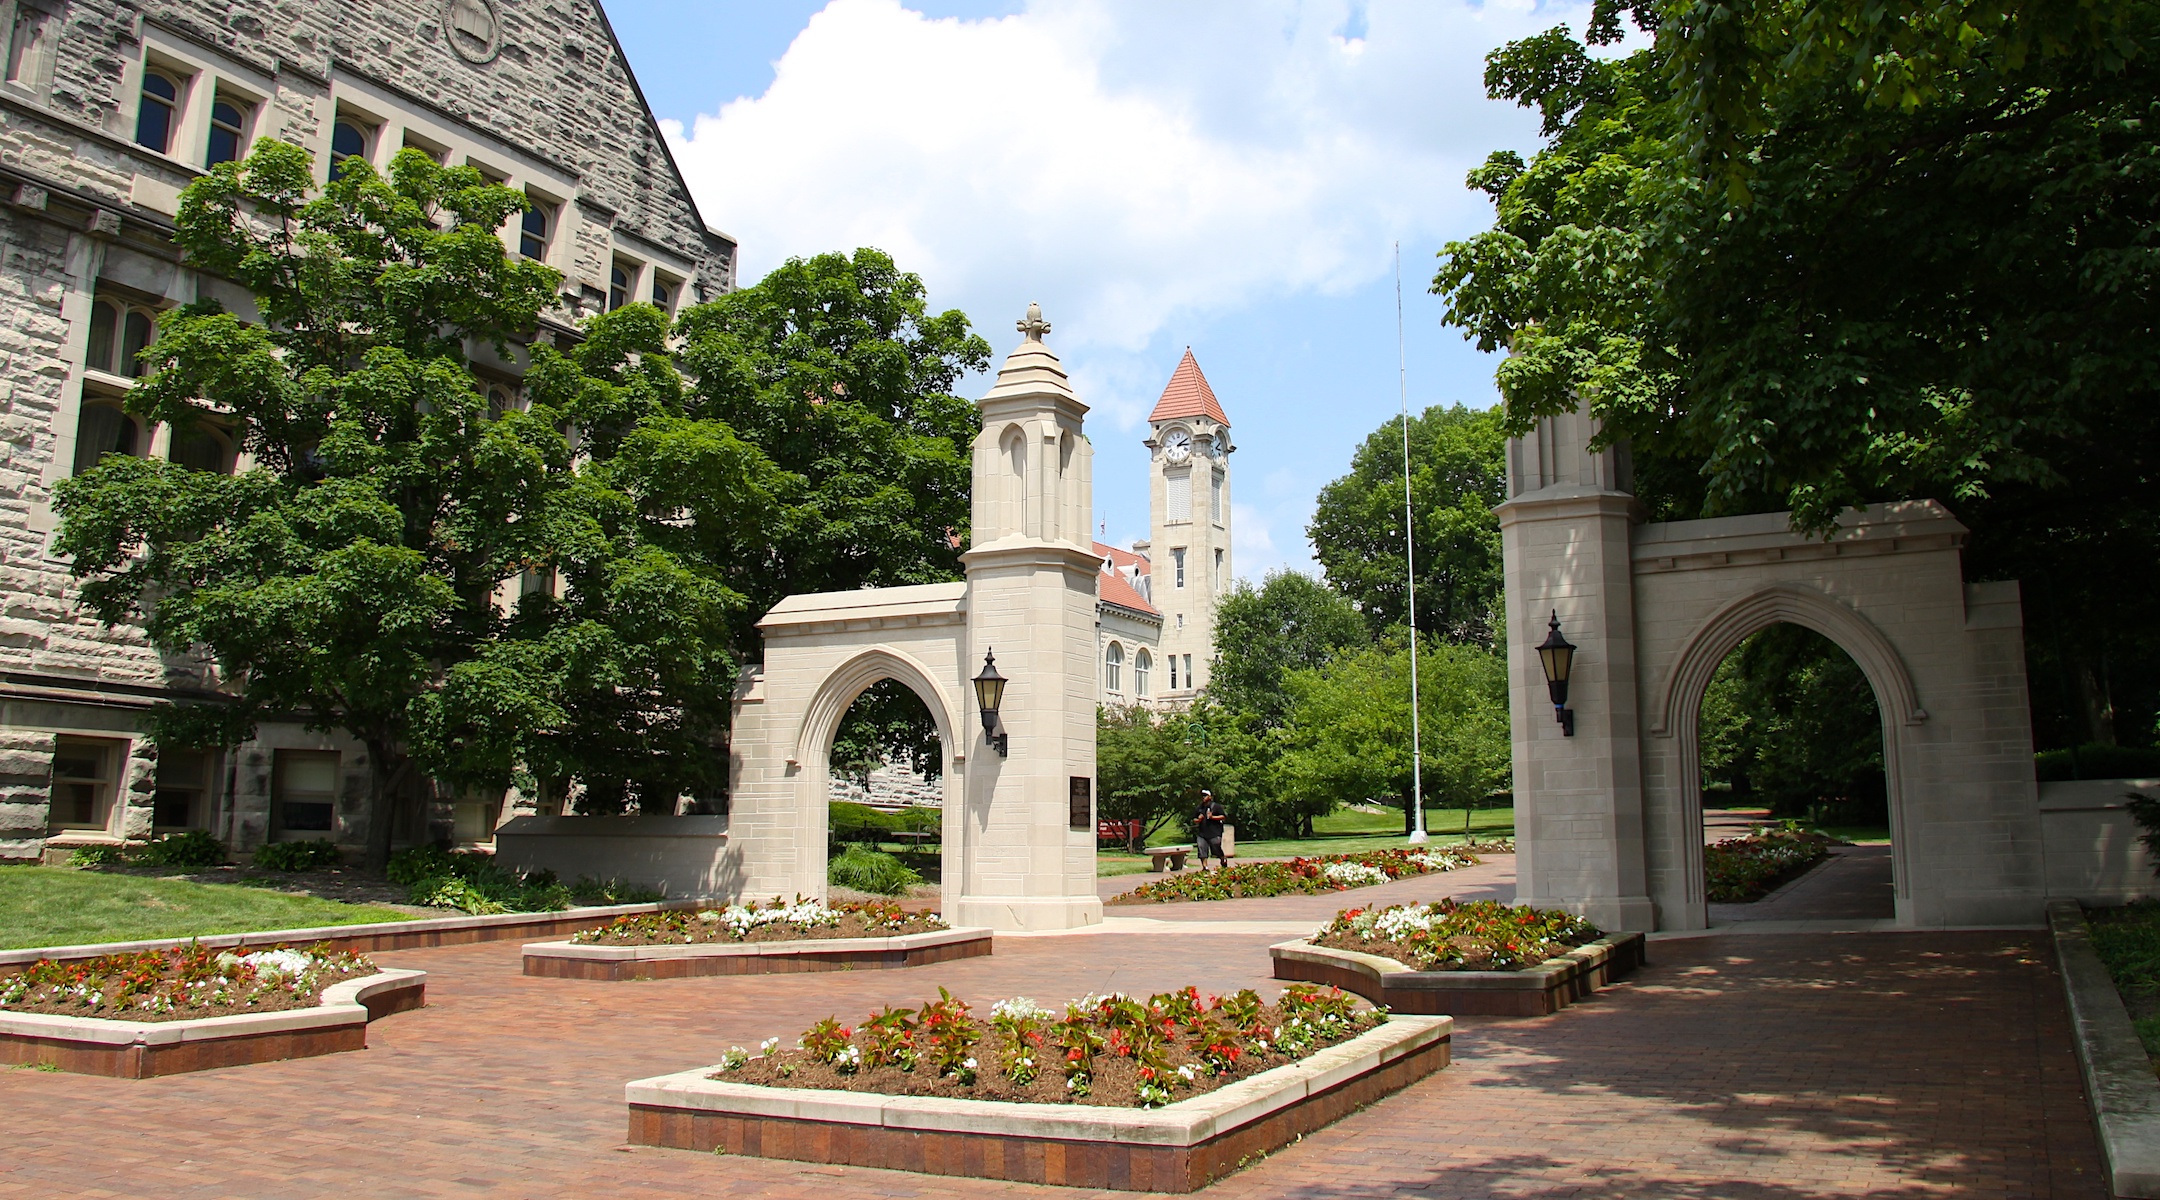 The outside of Indiana University Bloomington's campus